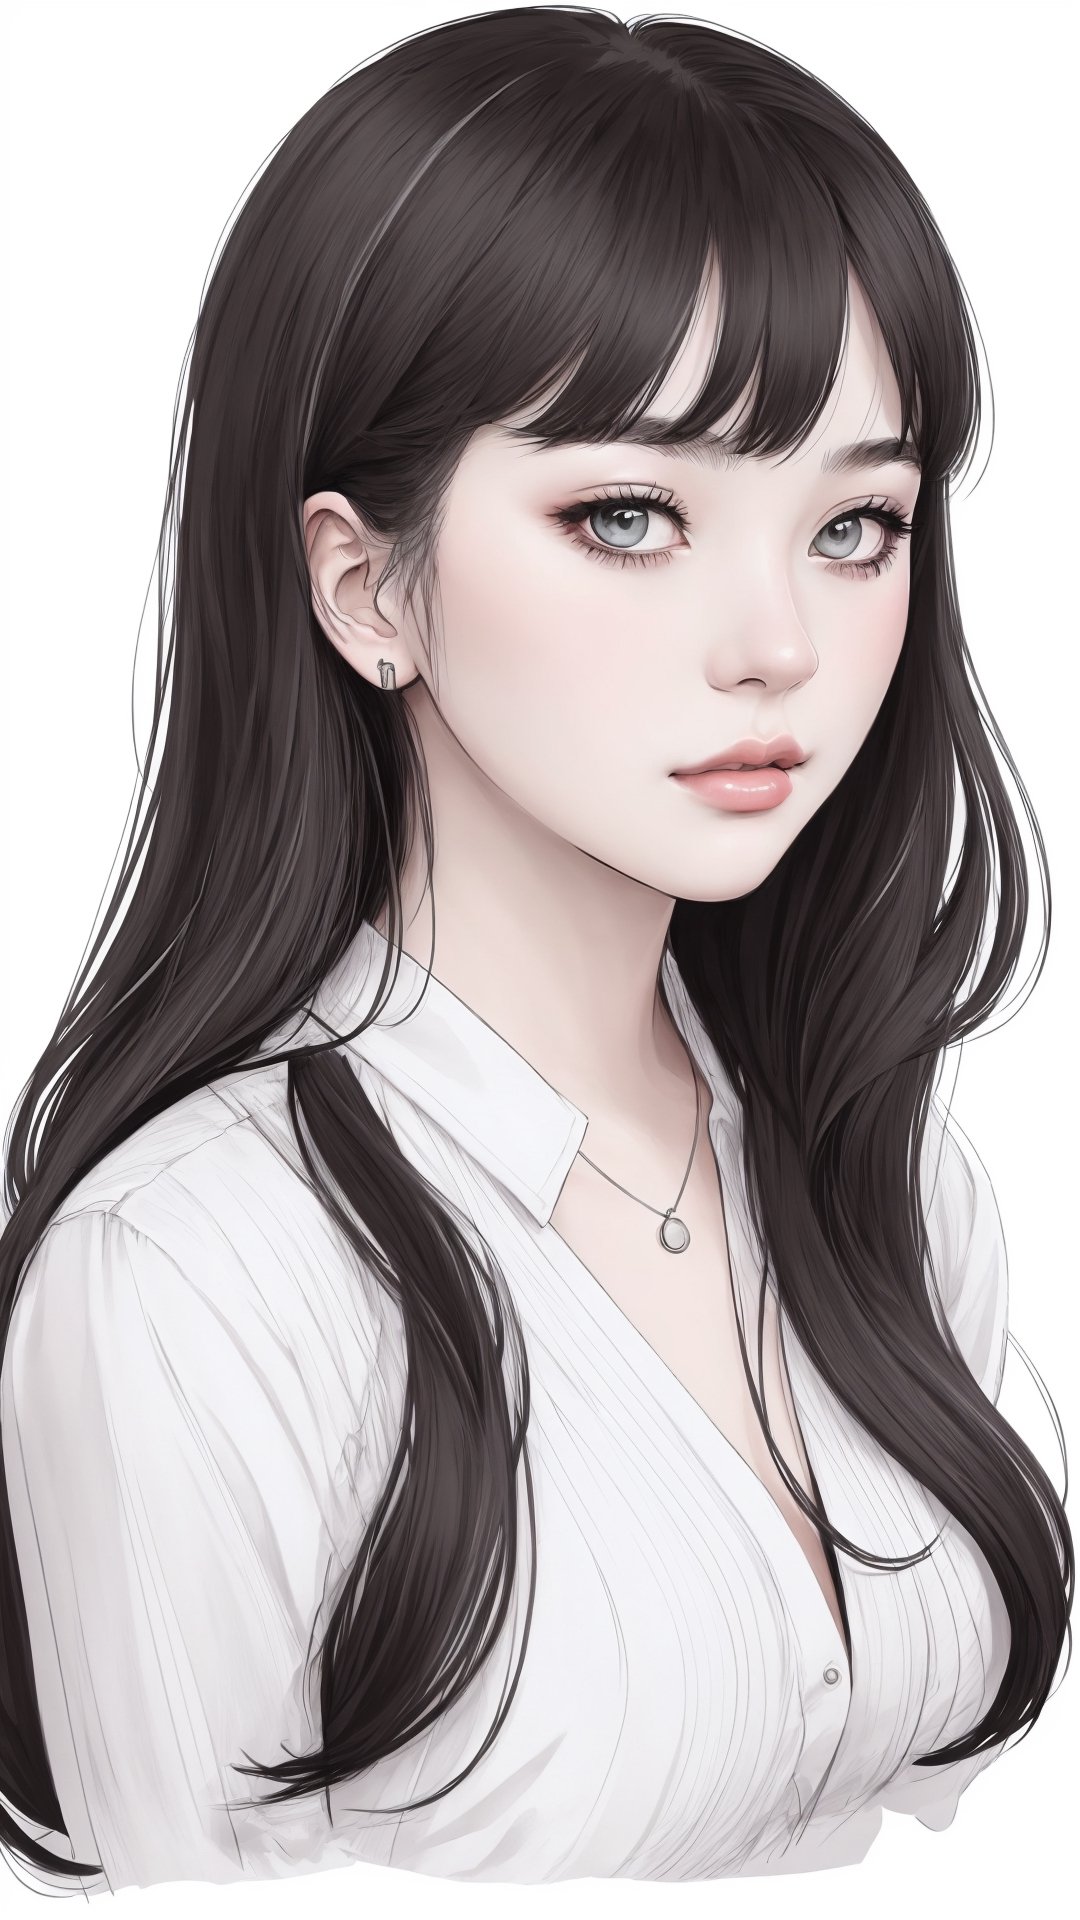 Woman, b/w outline art, Bangs, Straight long hair, full white, white background, coloring style, Sketch style, Sketch drawing,JeeSoo 